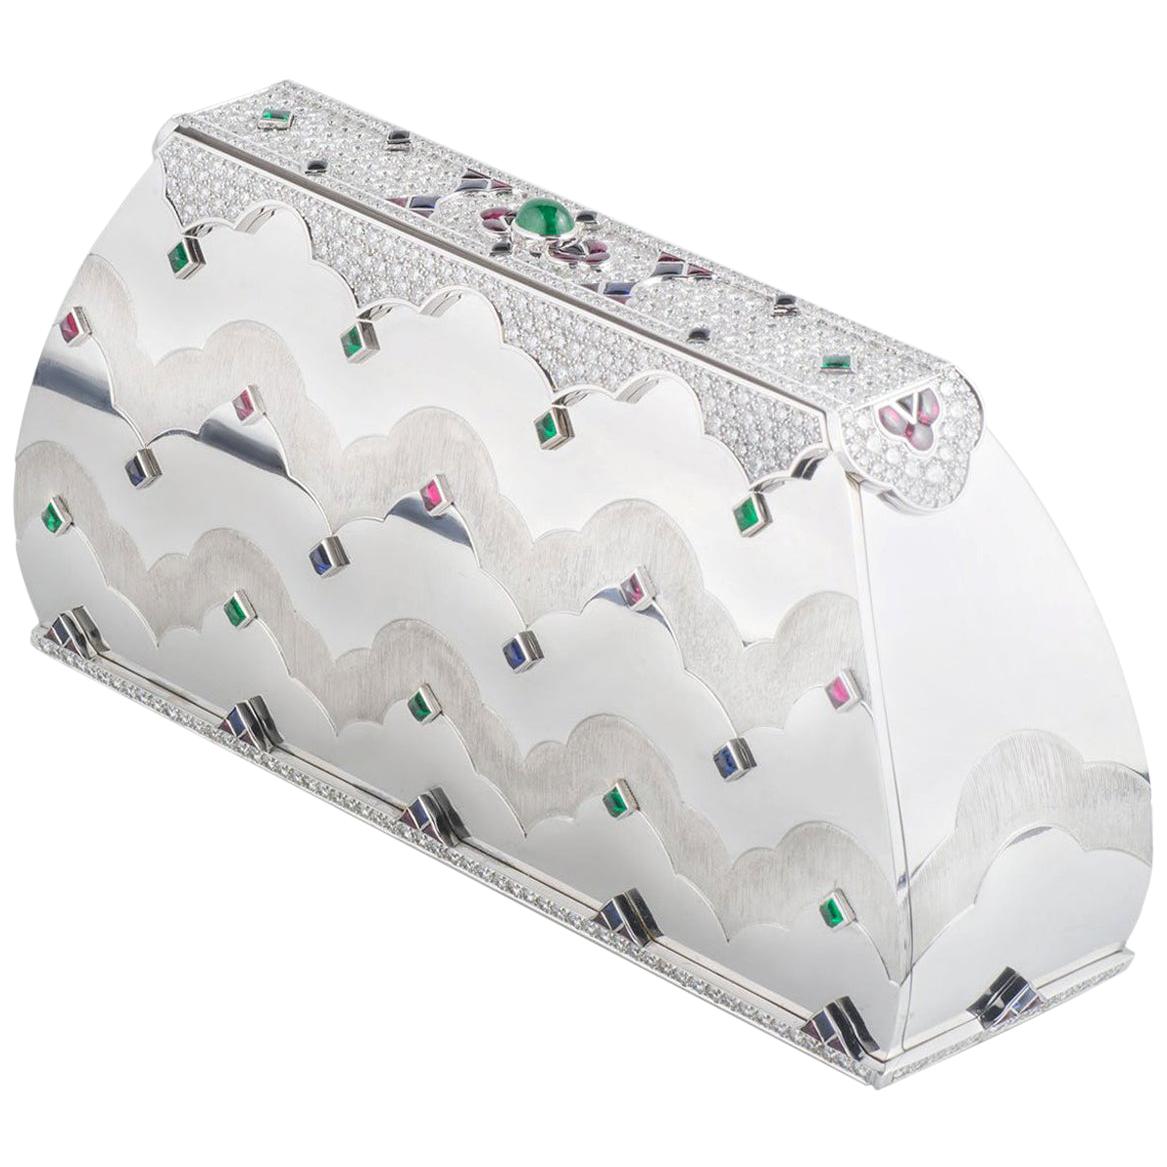 A unique 18k white gold Mauboussin multi-gemstone clutch bag. The clutch comprises of princess cabochon cut green tourmalines, sapphires and rubies placed evenly on the and back. There are diamonds set in a pave setting around the top and base of